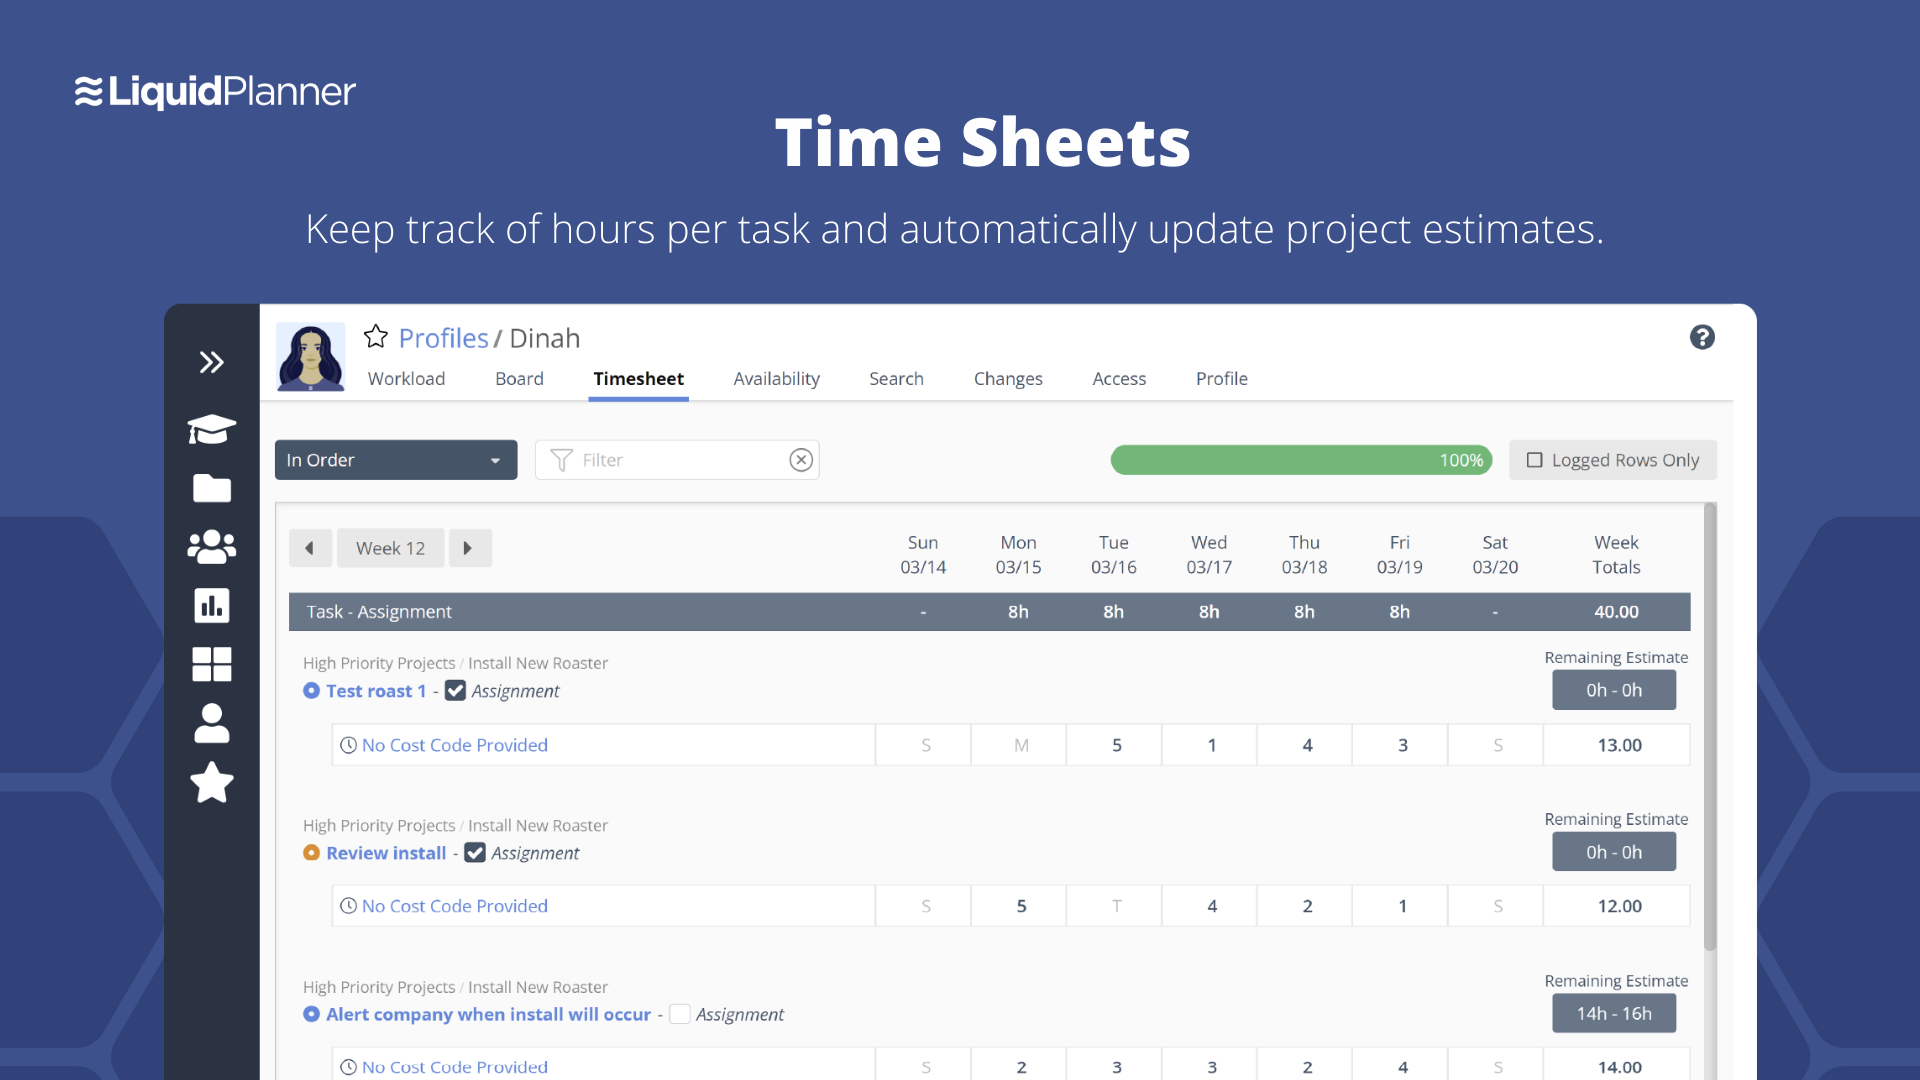 LiquidPlanner - Time Sheets keep track of hours per task and automatically update project estimates.